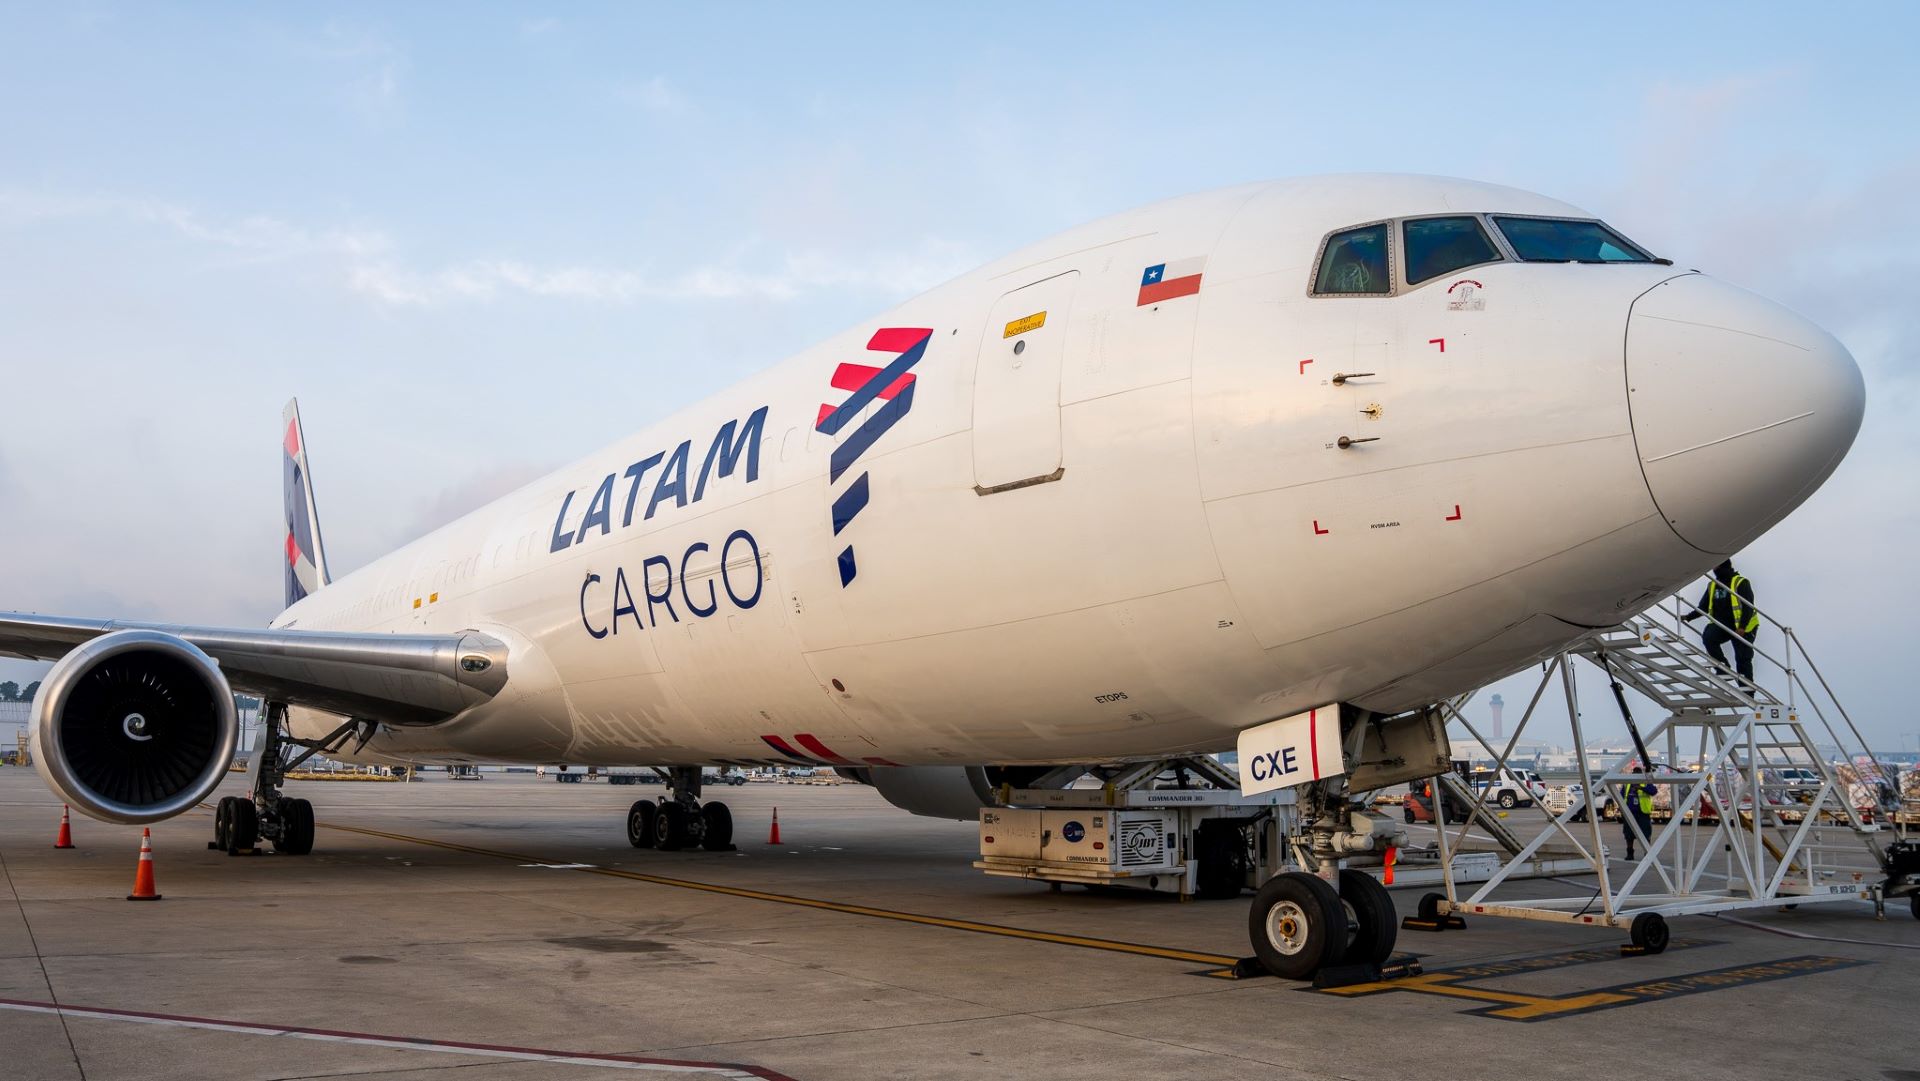 LATAM Cargo, SkyCell partner to bring hybrid solutions to South